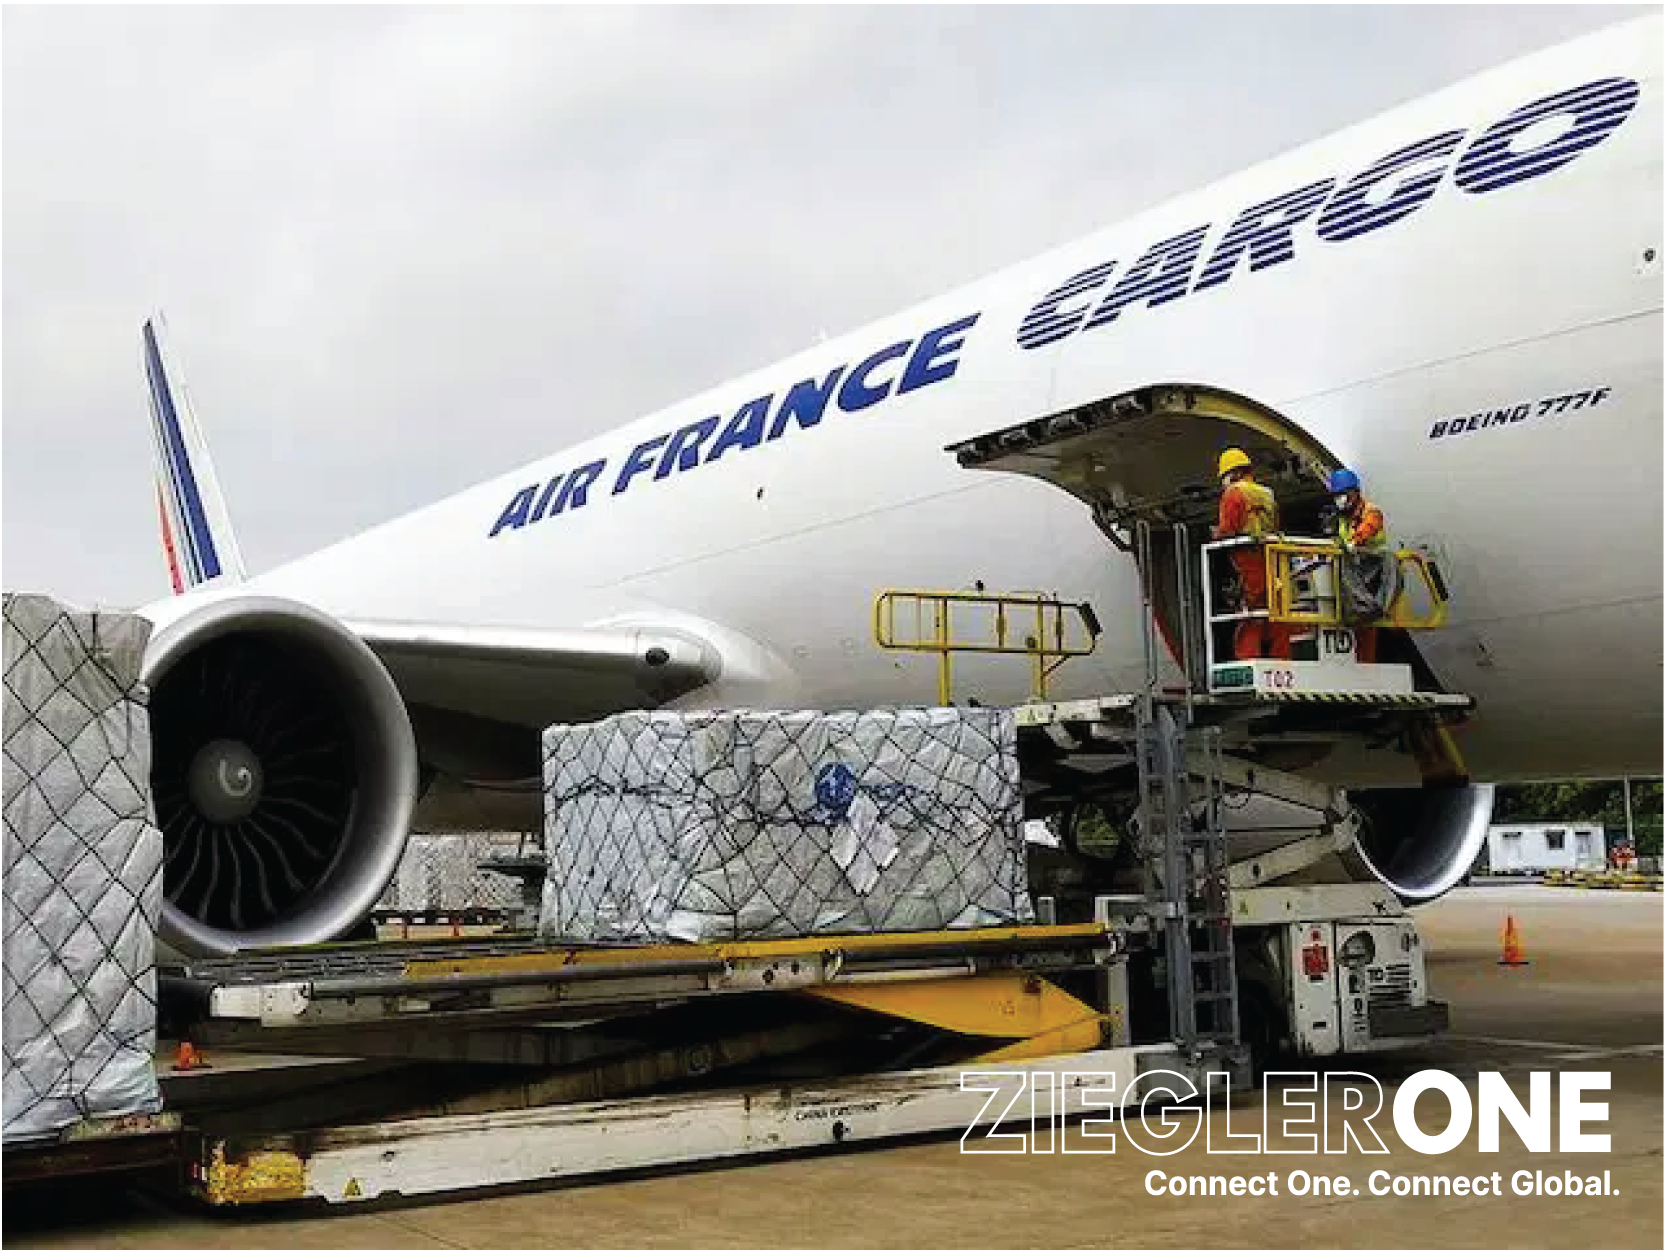 France suspended flights to West Africa